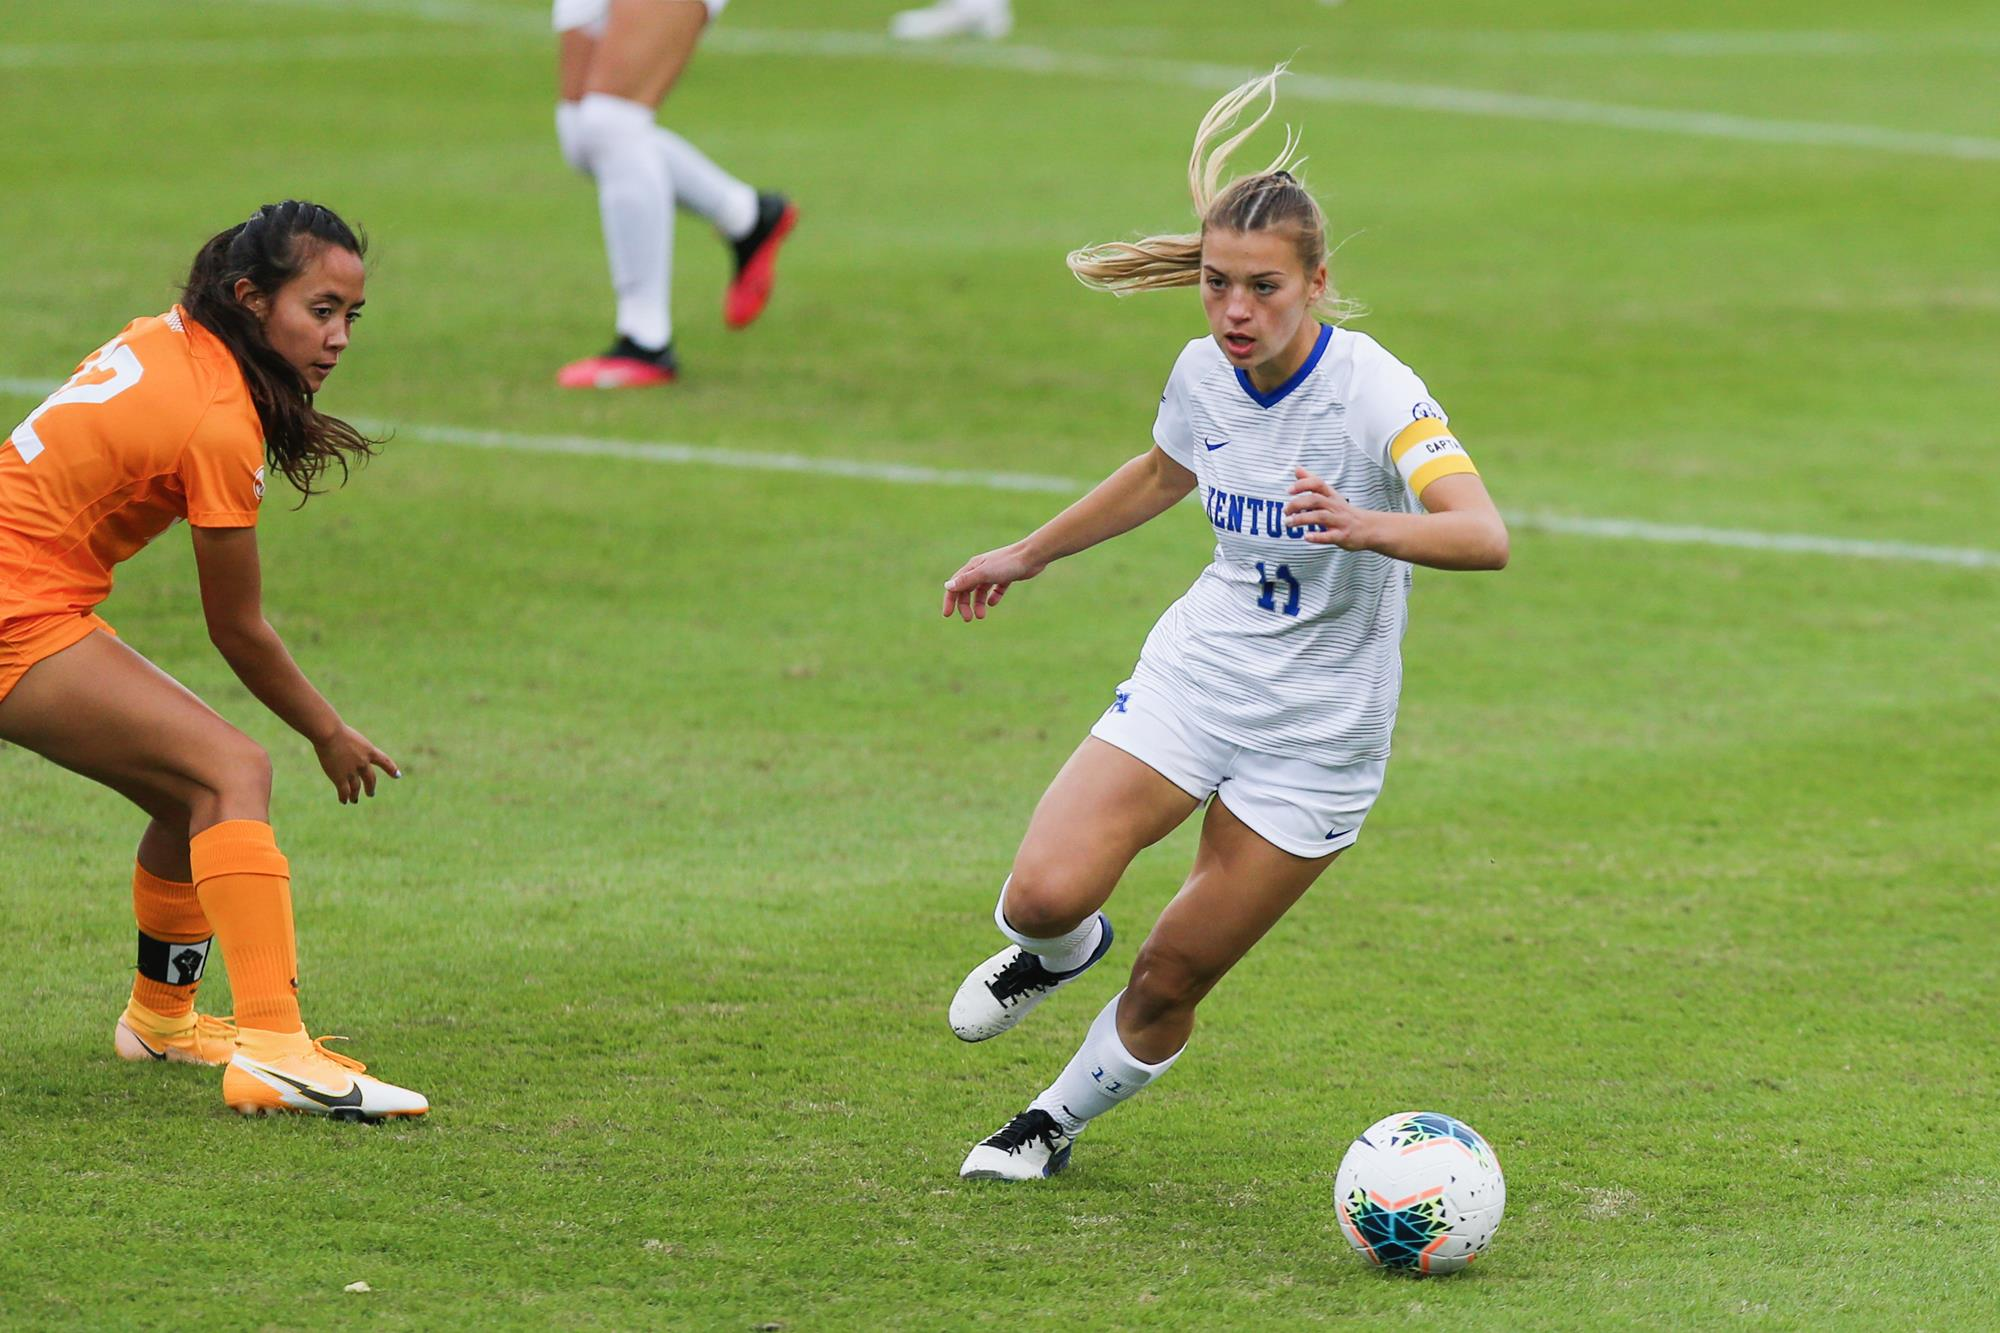 Grosso Scores Her First Goal of Season; Kentucky Plays Tennessee to 1-1 Draw